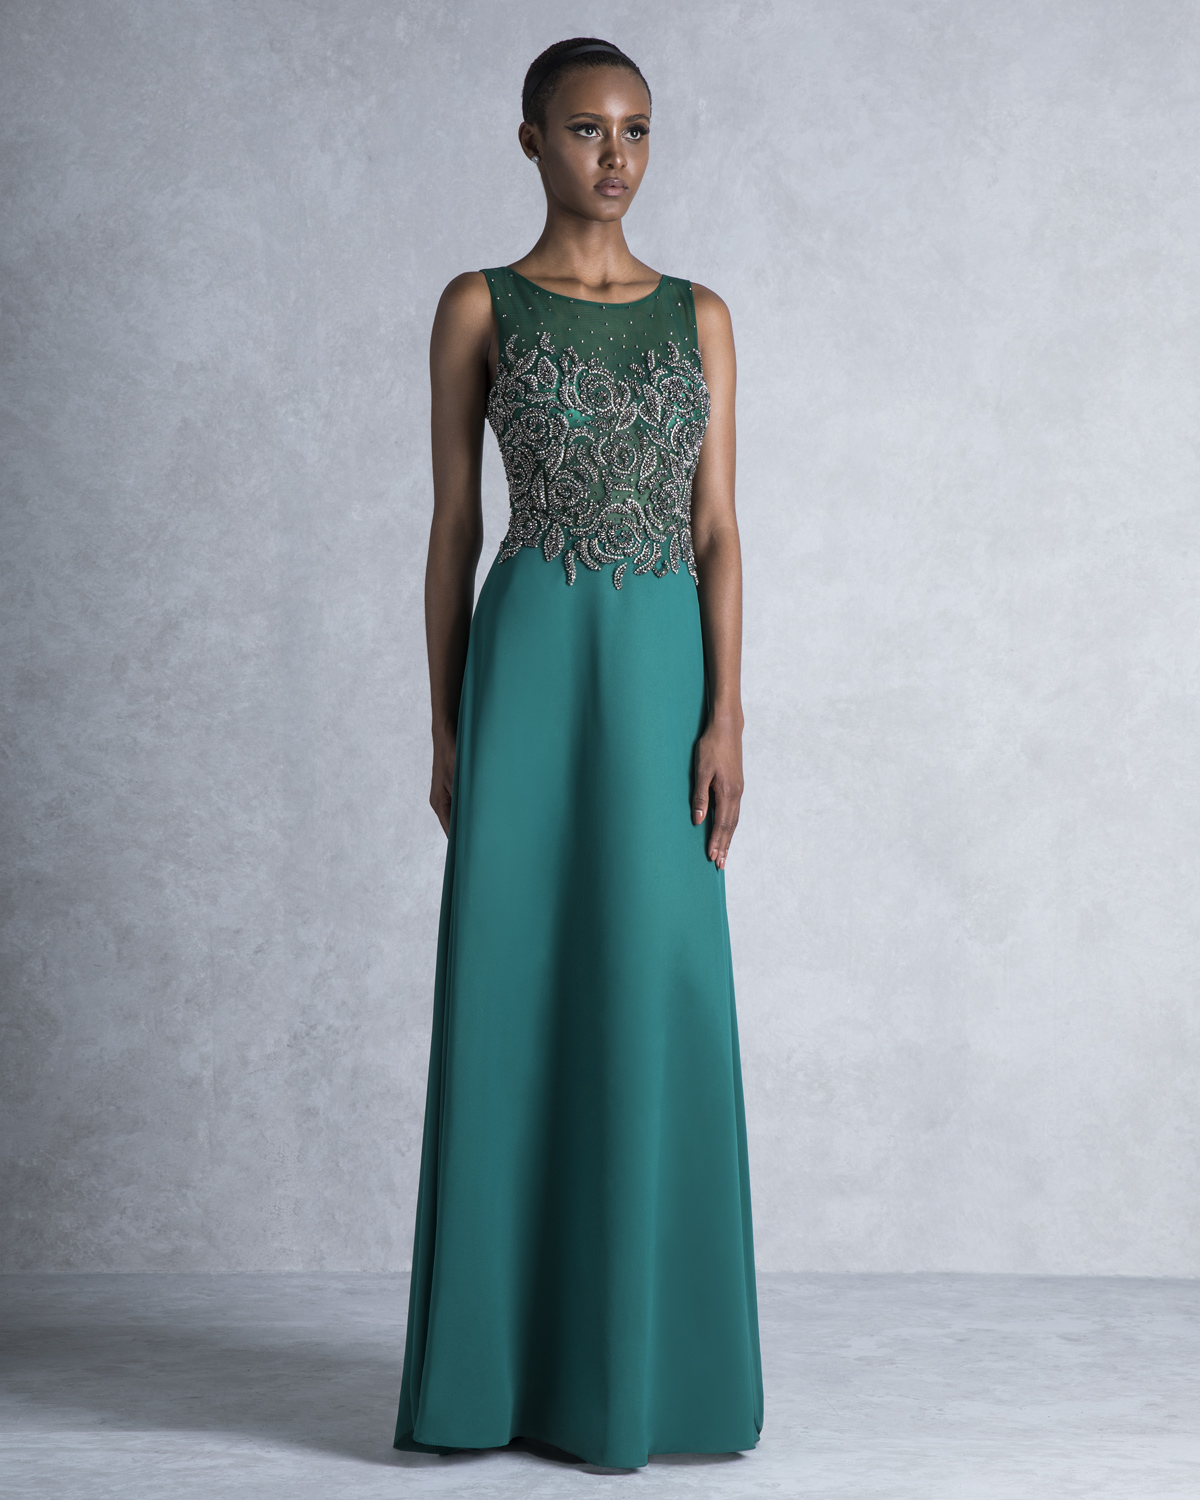 Classic Dresses / Long evening dress with beaded top